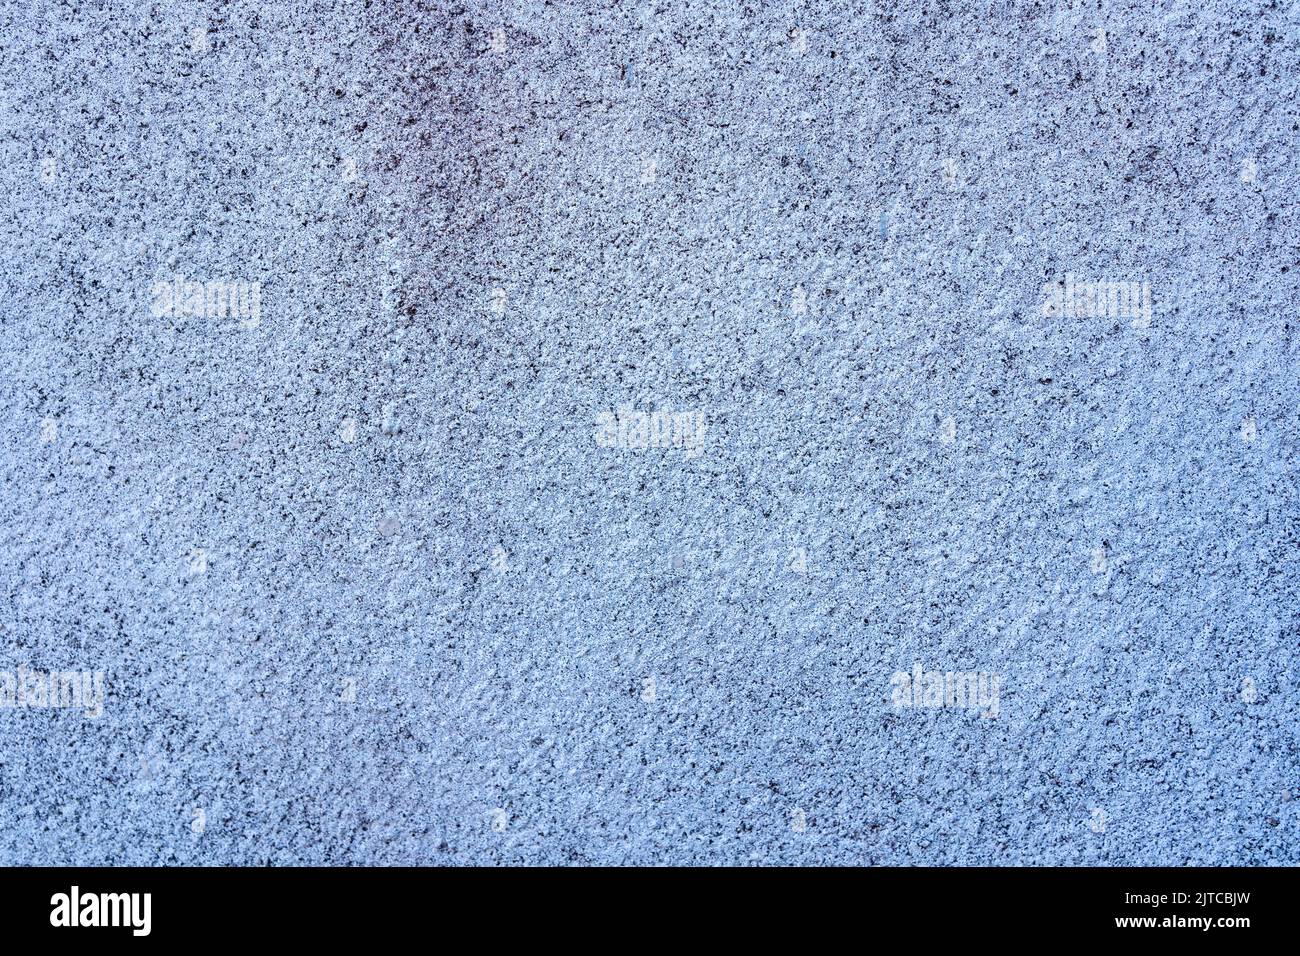 Texture made of close-up image of shell rock surface white and gray Stock Photo